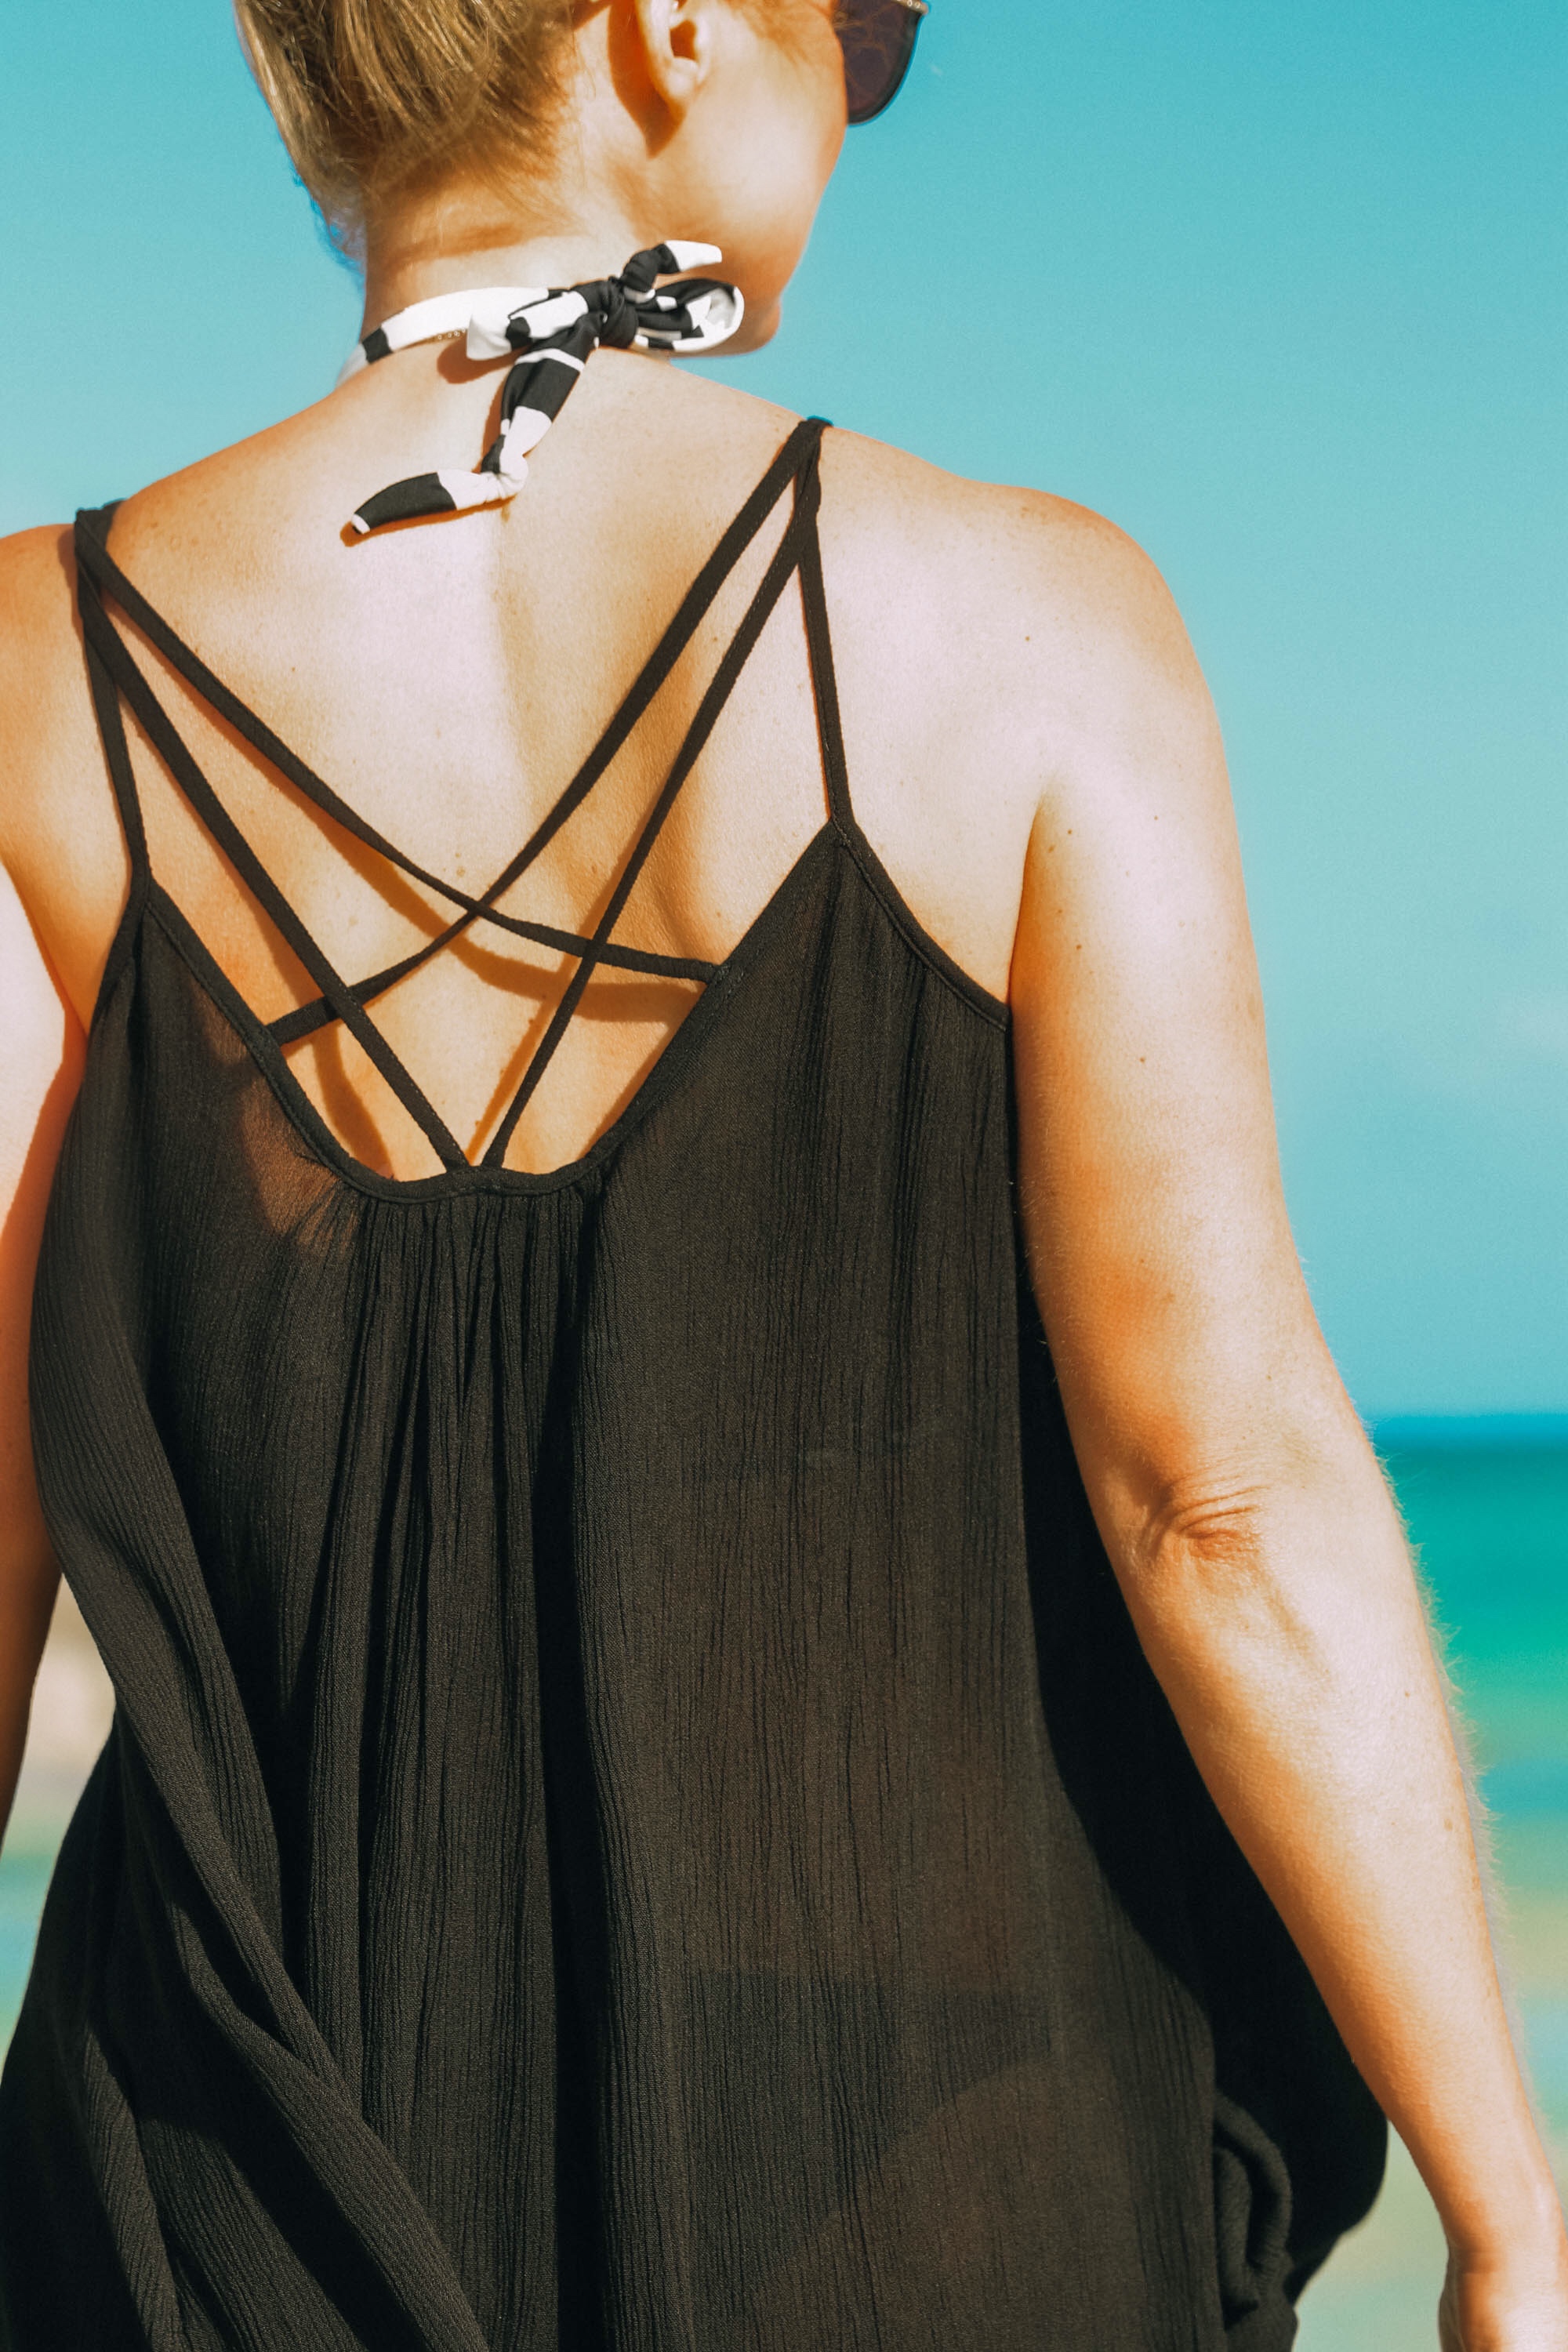 Best Coverups, Fashion blogger Erin Busbee of BusbeeStyle.com wearing a black strappy Elan coverup dress over a Vix swimsuit holding studded Vince Camuto sandals in the Bahamas